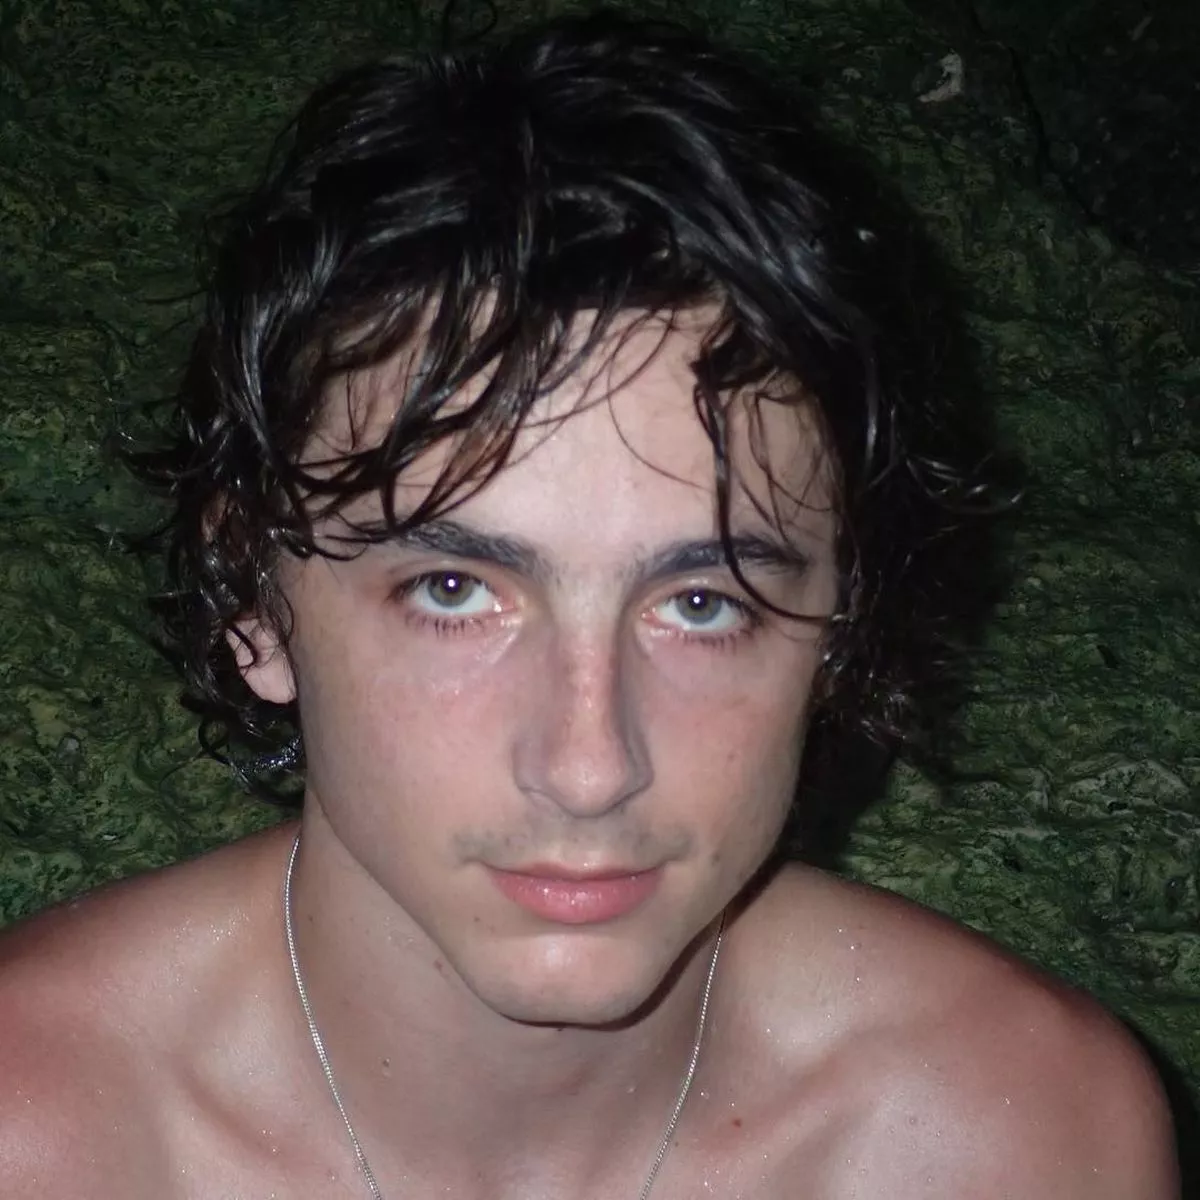 0_Timothee-Chalamet-posts-shirtless-in-thirsty-insta-snaps-as-kylie-jenner-rumours-heat-up.jpg